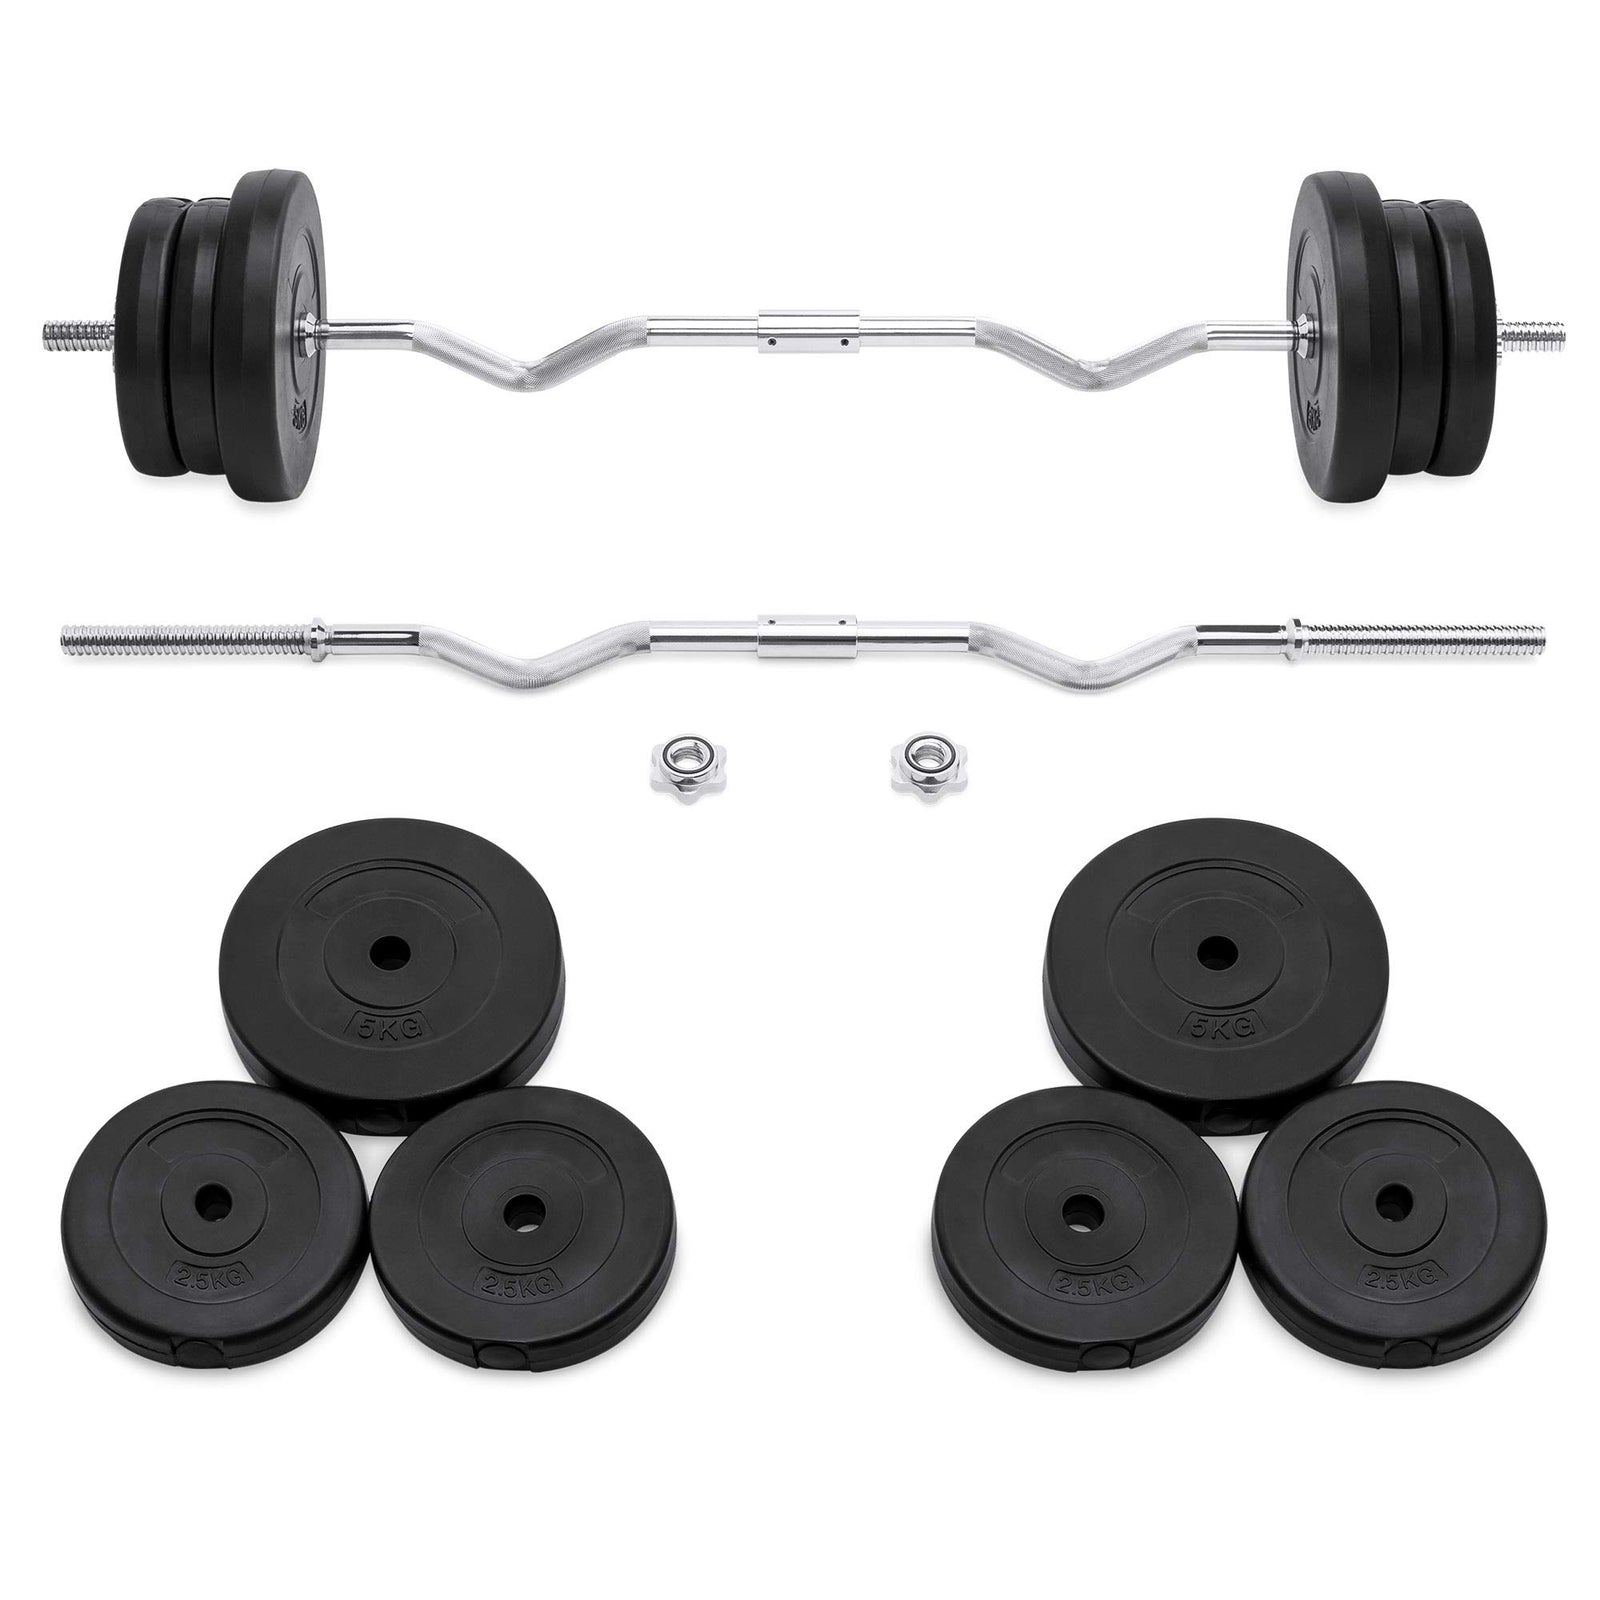 Best Choice Products 55lb 1in EZ Curl Bar Barbell Weight Set w/ 2 Lock Clamp Collars, 6 Plates - Silver/Black